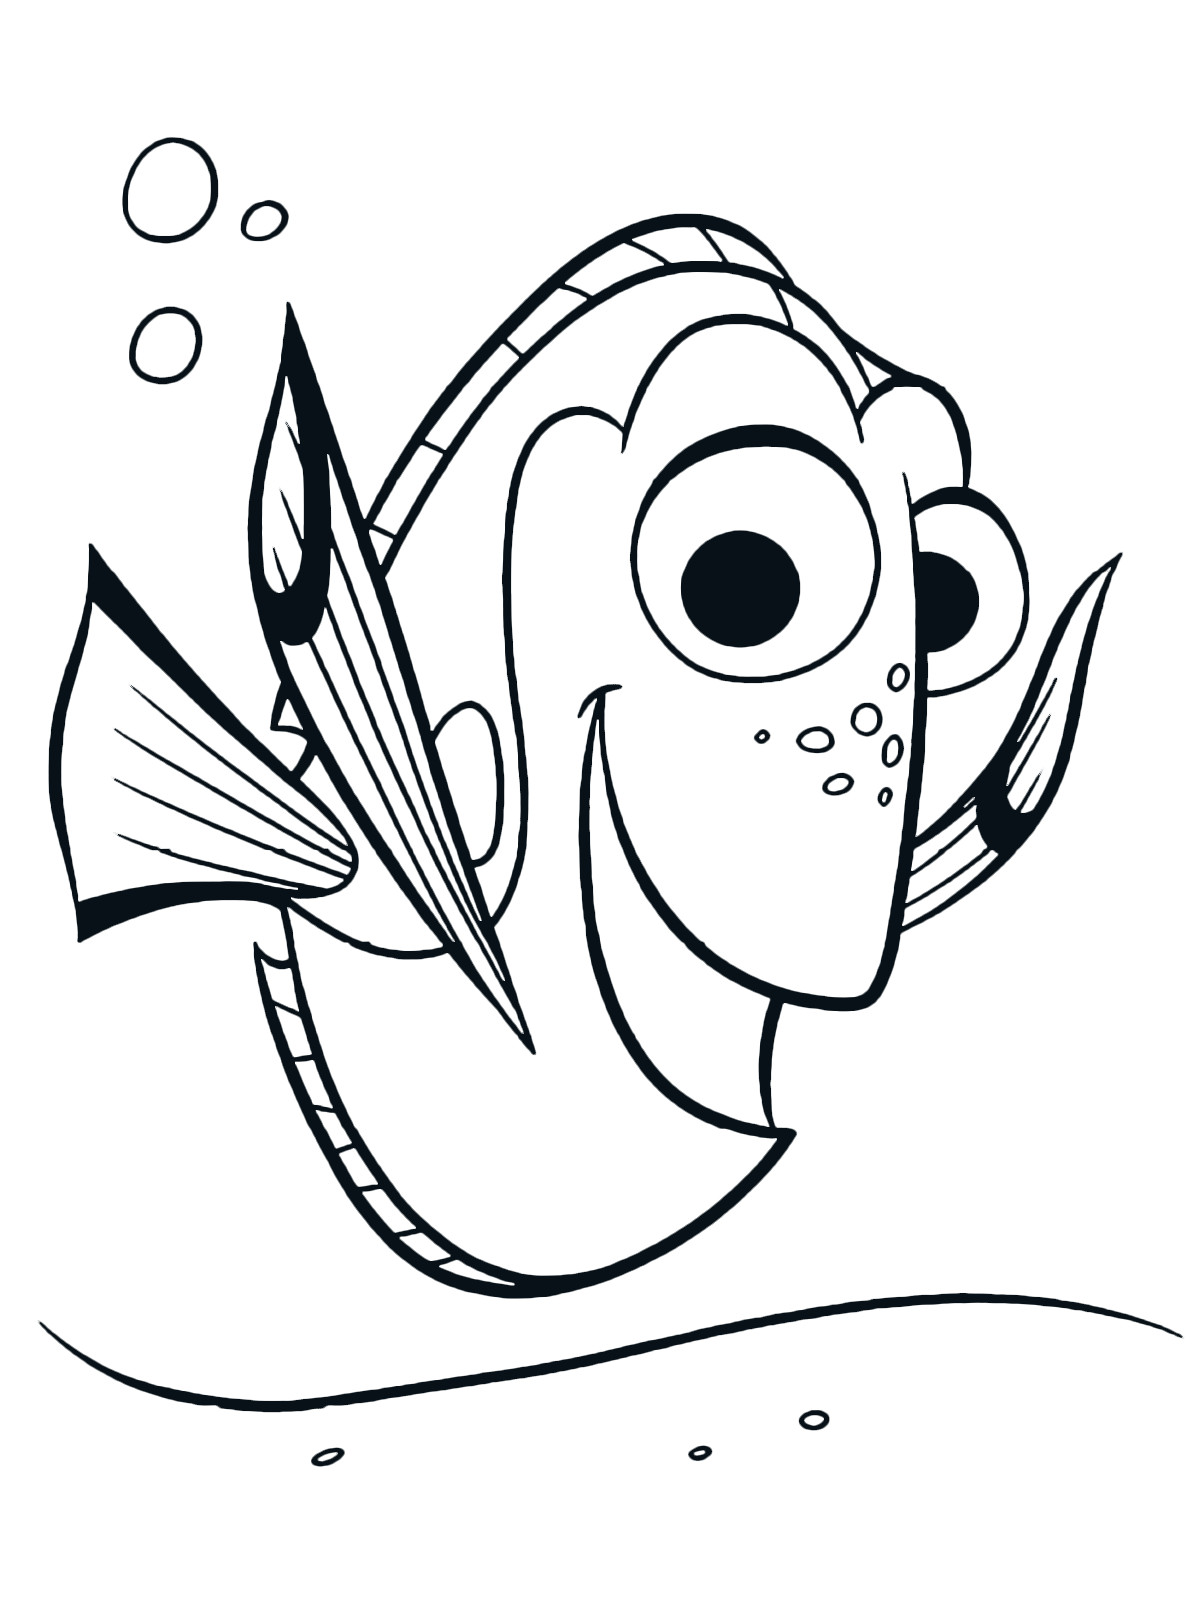 Baby Dory Coloring Pages
 "Finding Dory" coloring pages